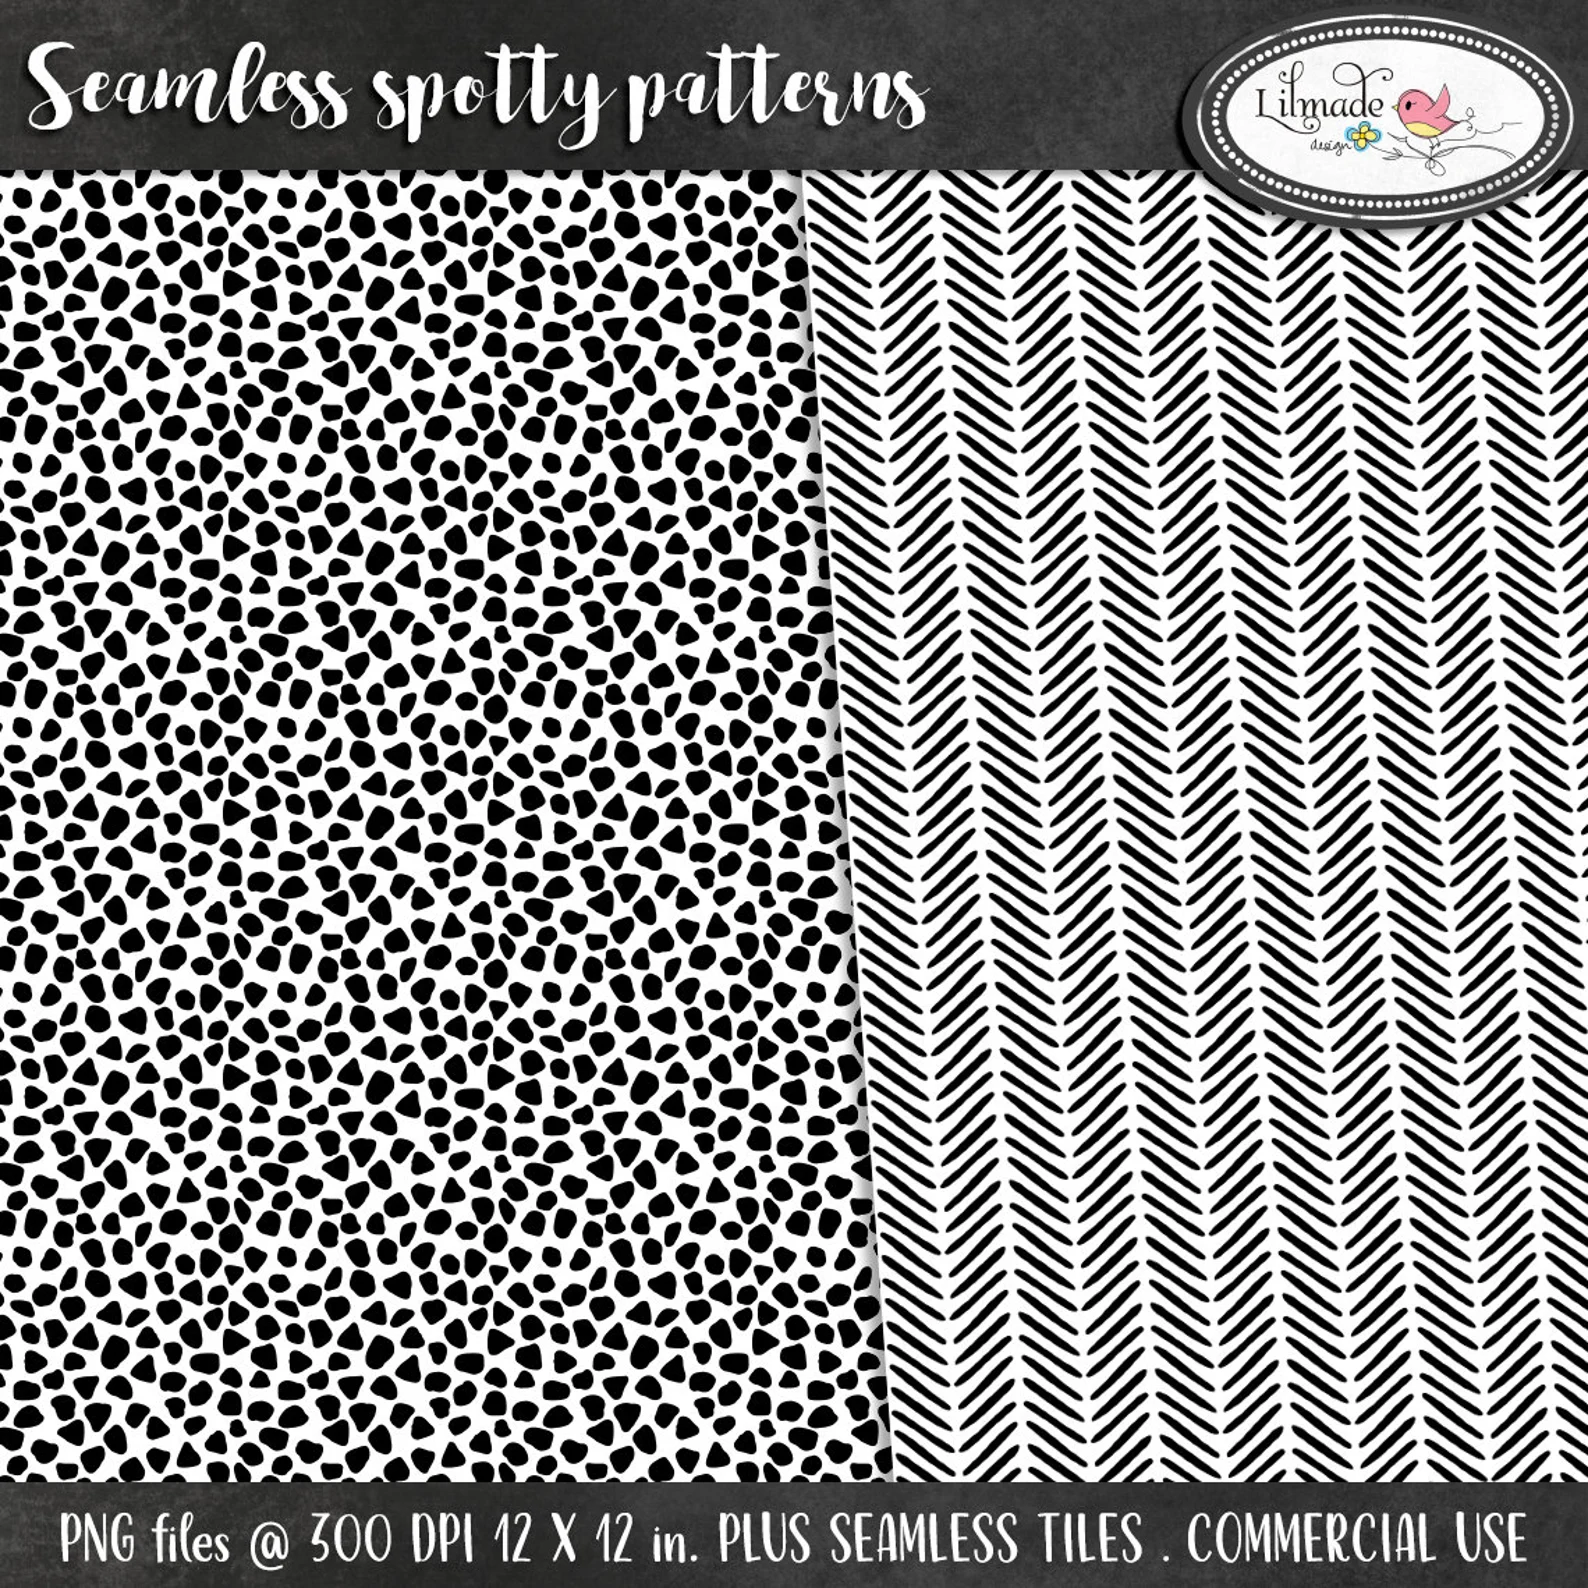 Seamless-spotty-and-terrazo-patterns for-commercial-use-hand-drawn-pattern